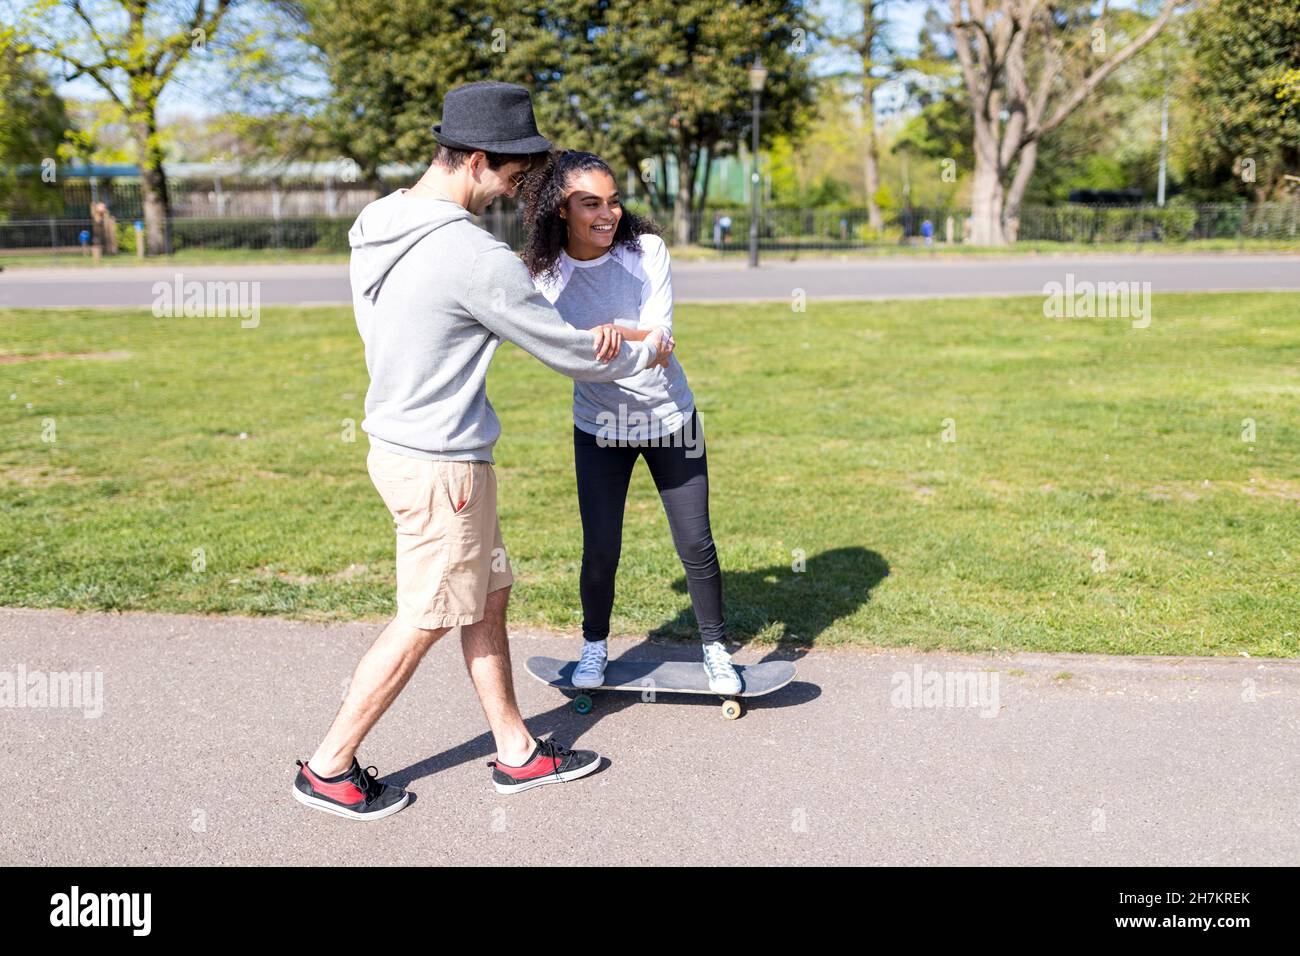 Man assisting friend while skateboarding in park Stock Photo